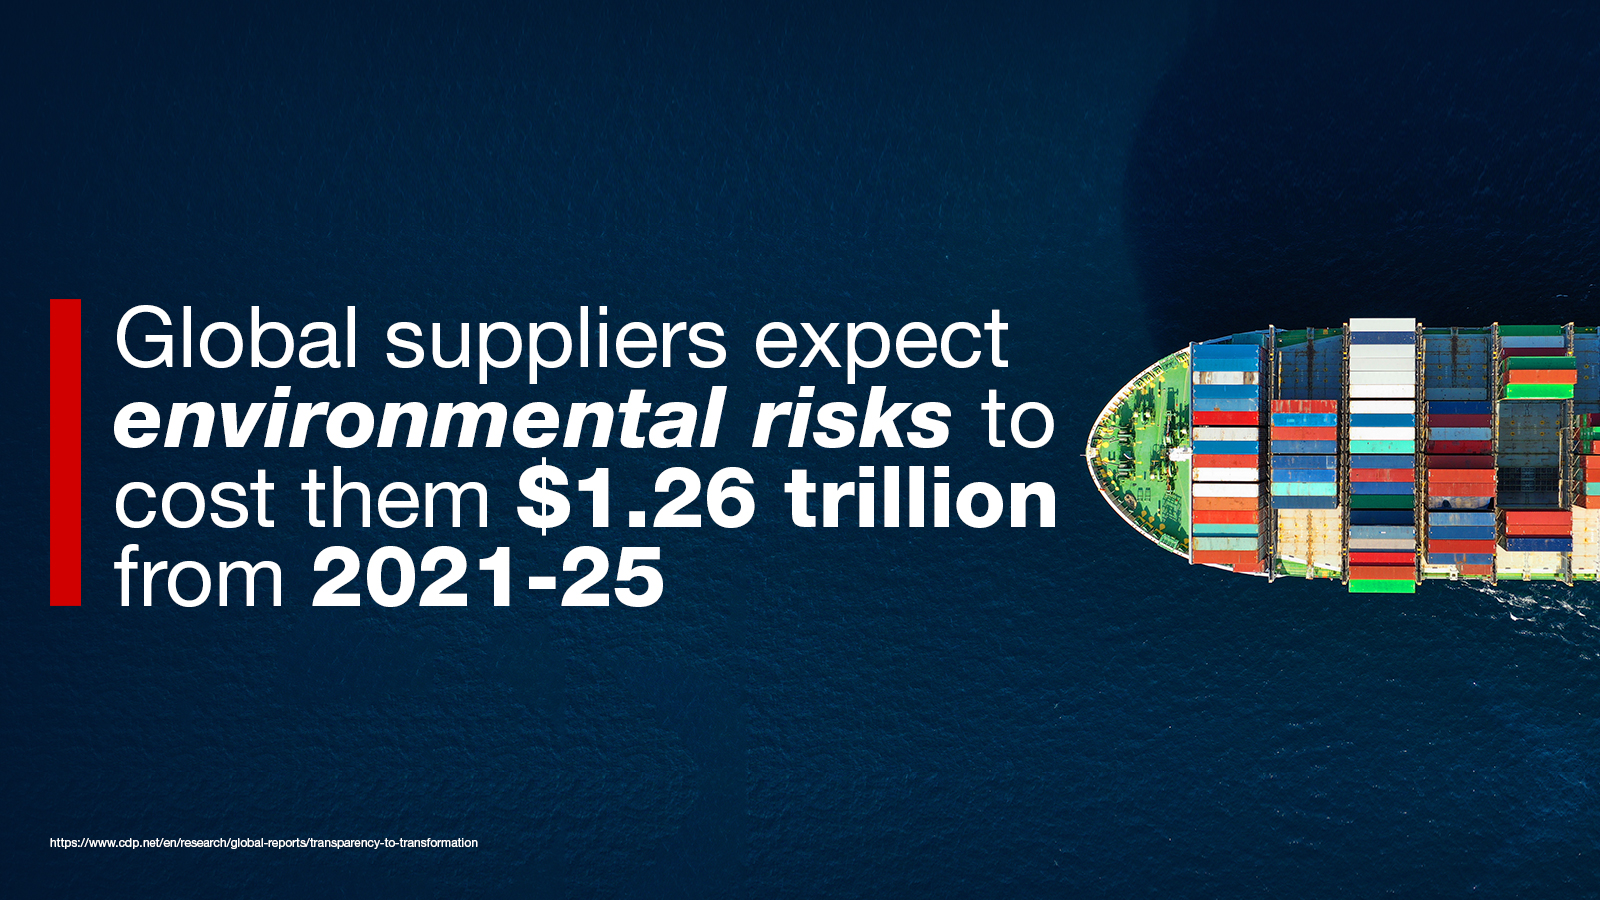 Global suppliers expect environmental risks to cost them $1.26 trillion through 2025